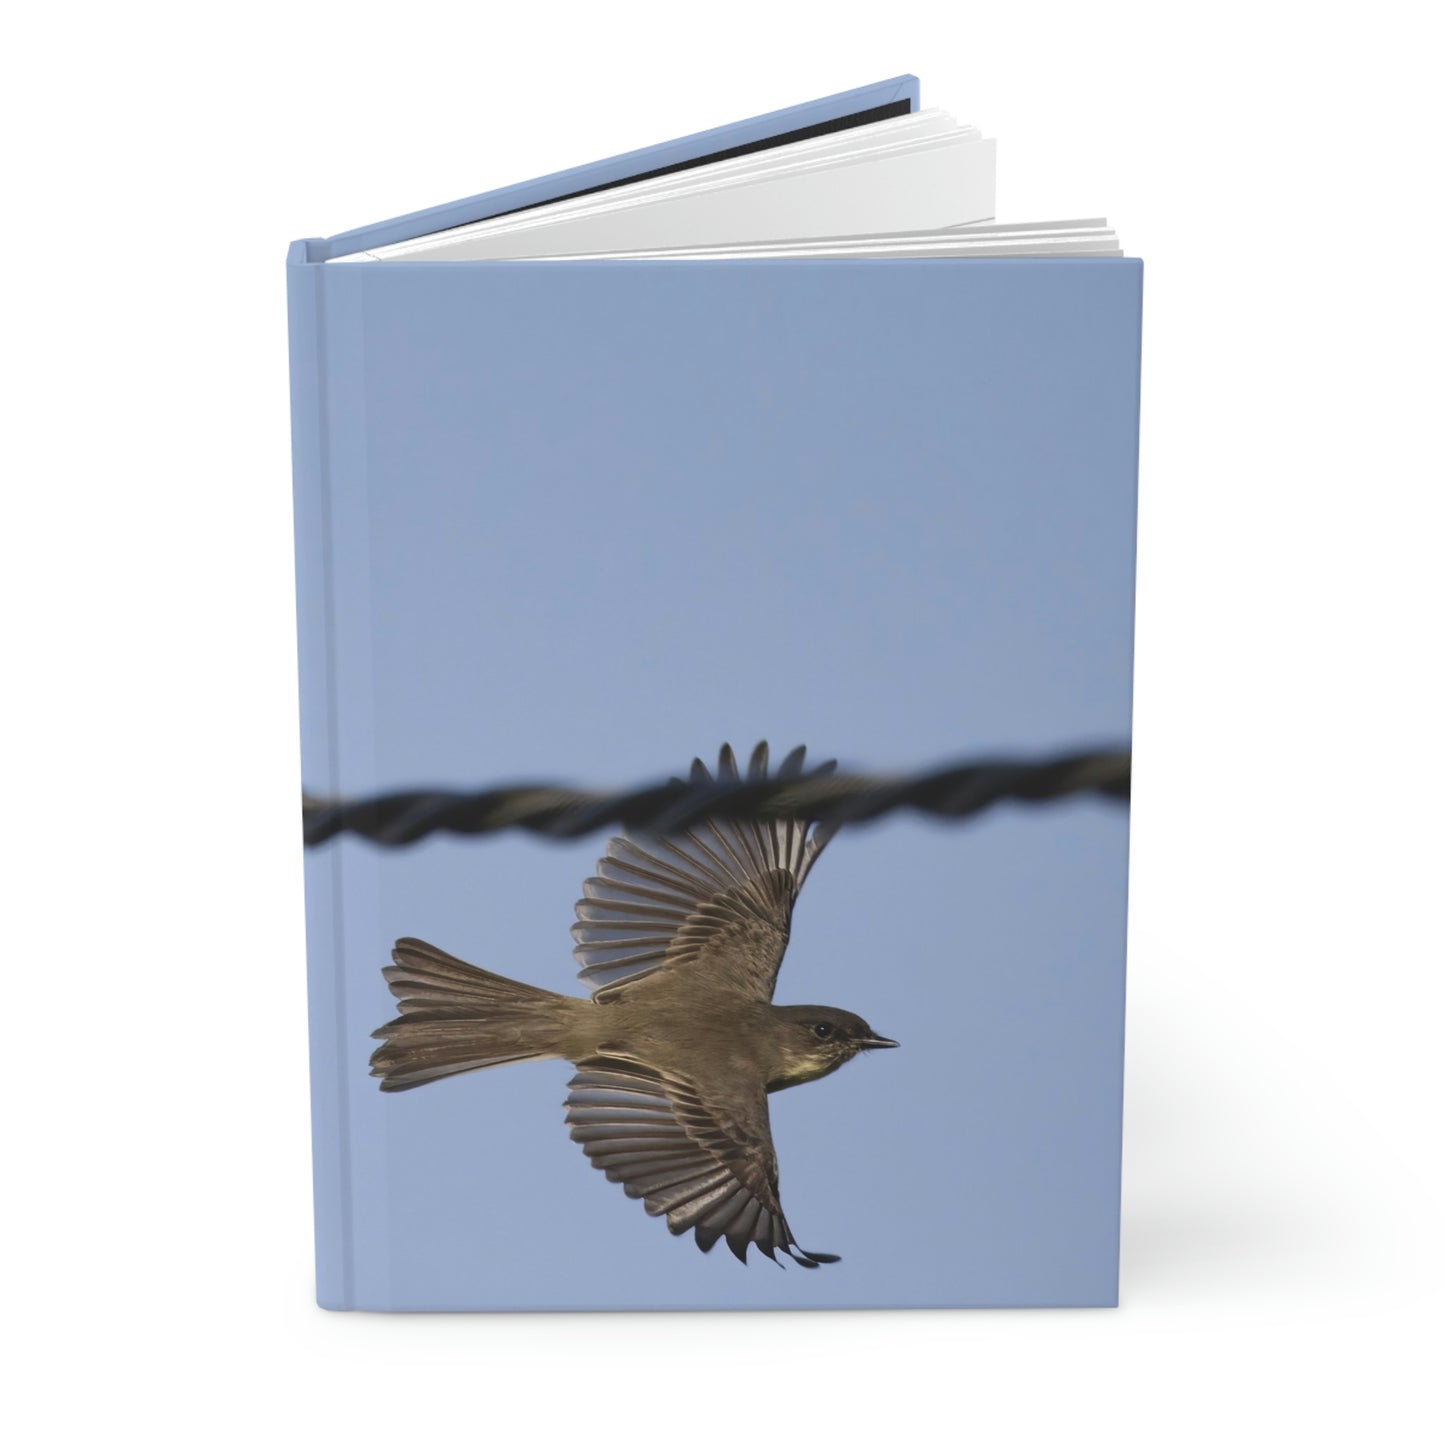 Spread Your Wings Hardcover Journal Matte